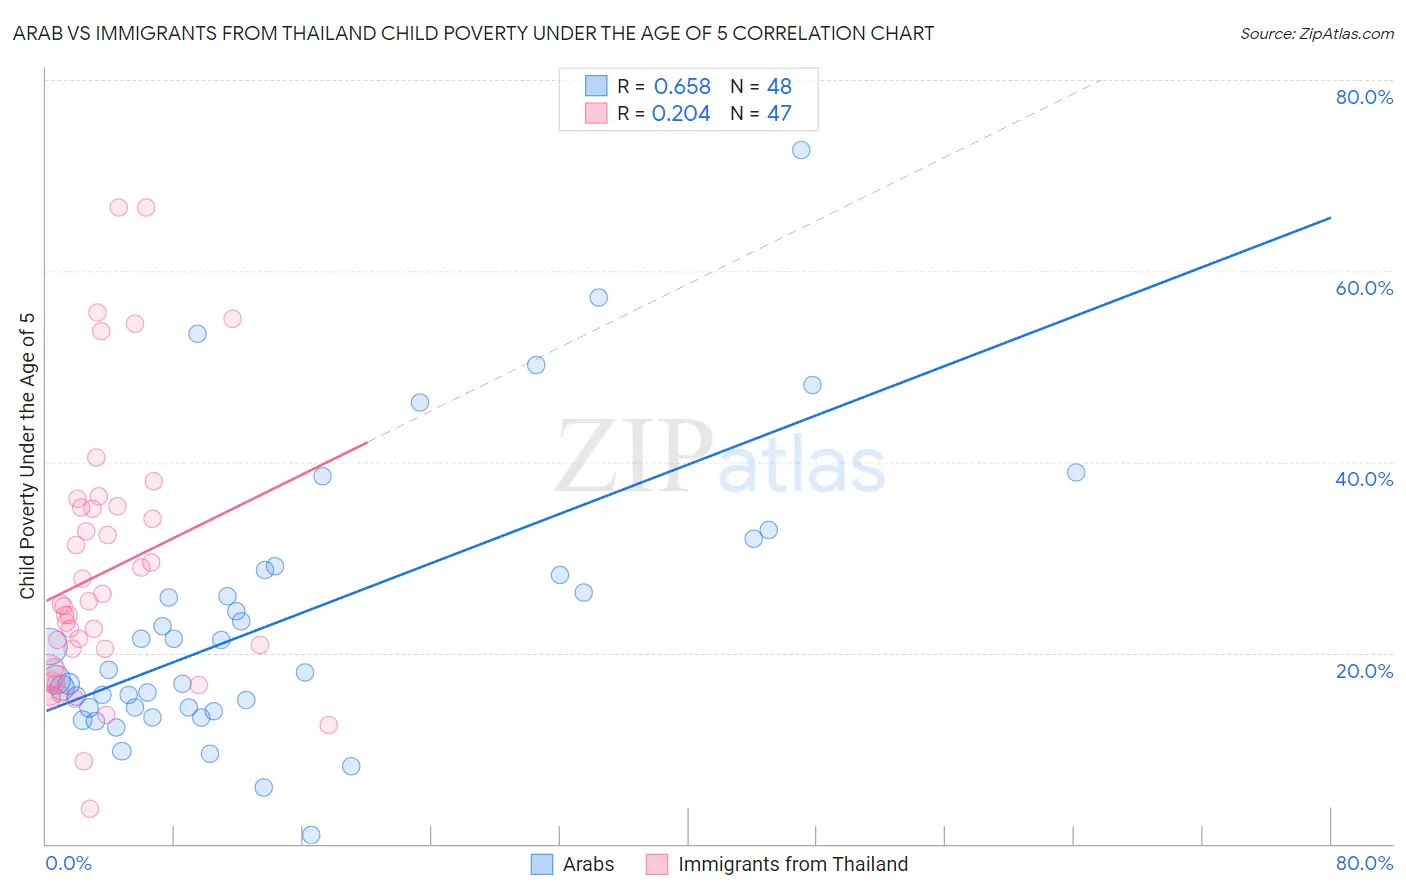 Arab vs Immigrants from Thailand Child Poverty Under the Age of 5